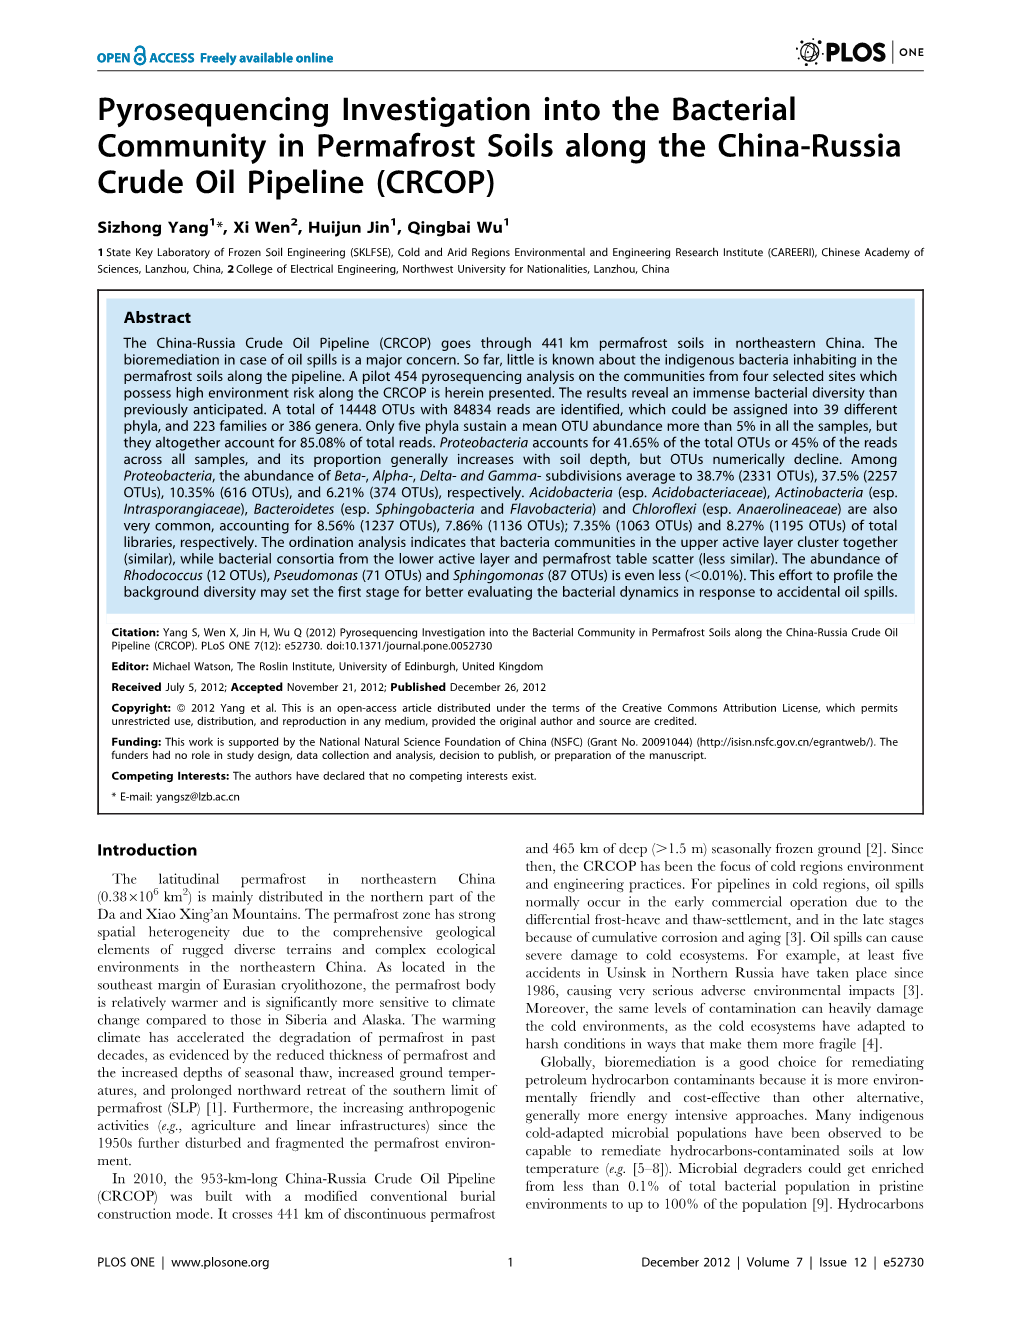 Pyrosequencing Investigation Into the Bacterial Community in Permafrost Soils Along the China-Russia Crude Oil Pipeline (CRCOP)